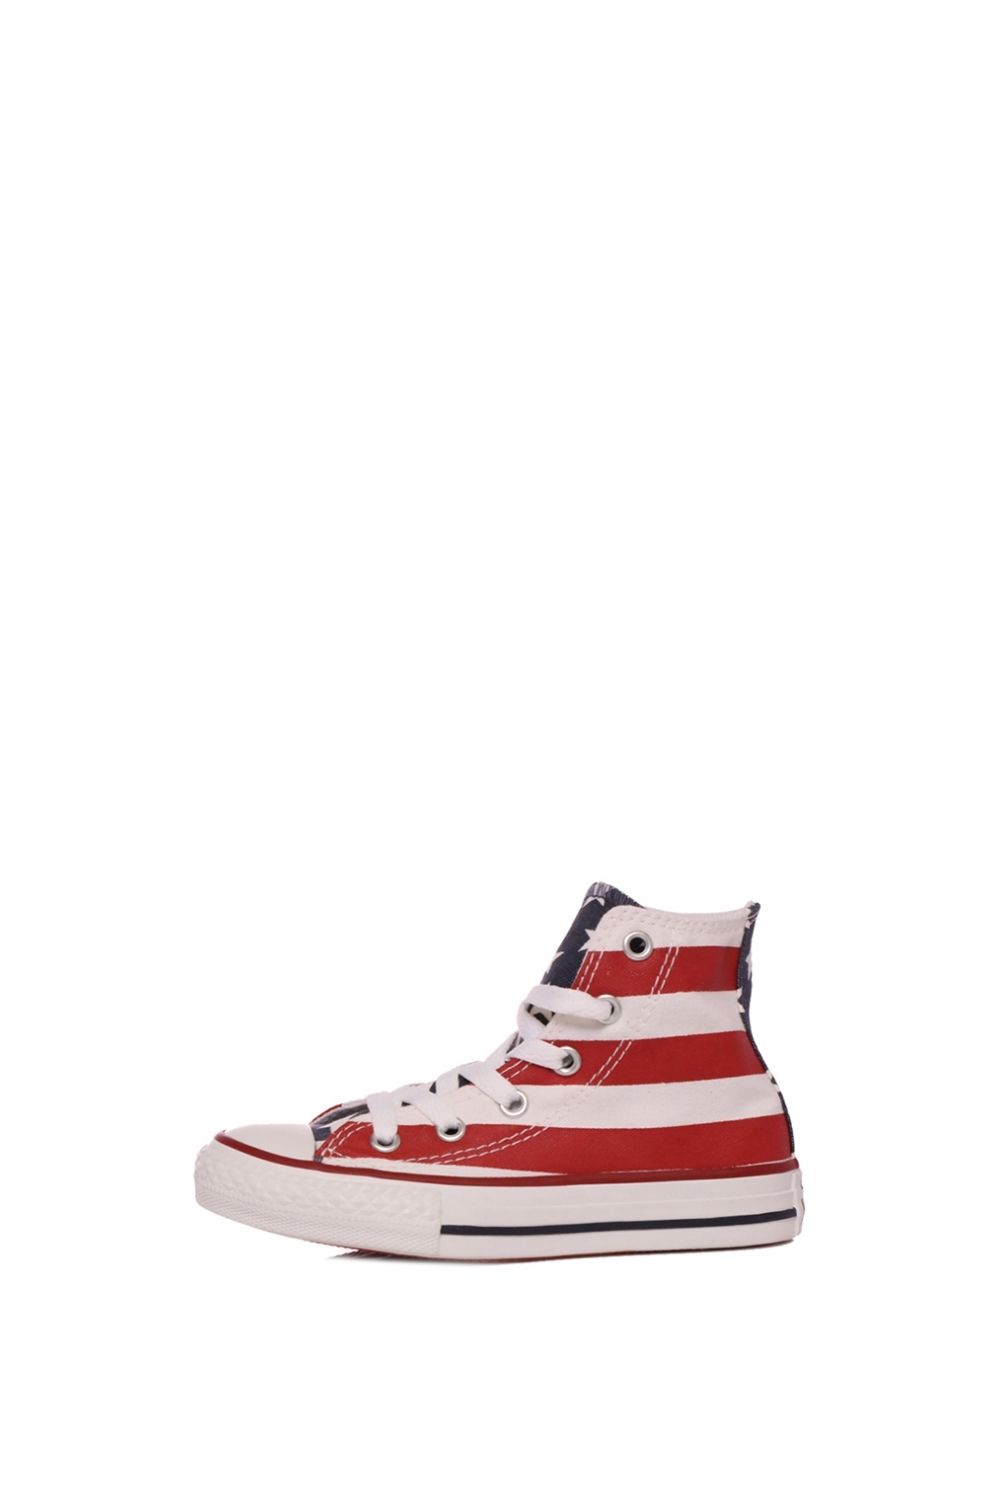 CONVERSE - Παιδικά ψηλά sneakers Chuck Taylor All Star Hi λευκά κόκκινα Παιδικά/Boys/Παπούτσια/Sneakers